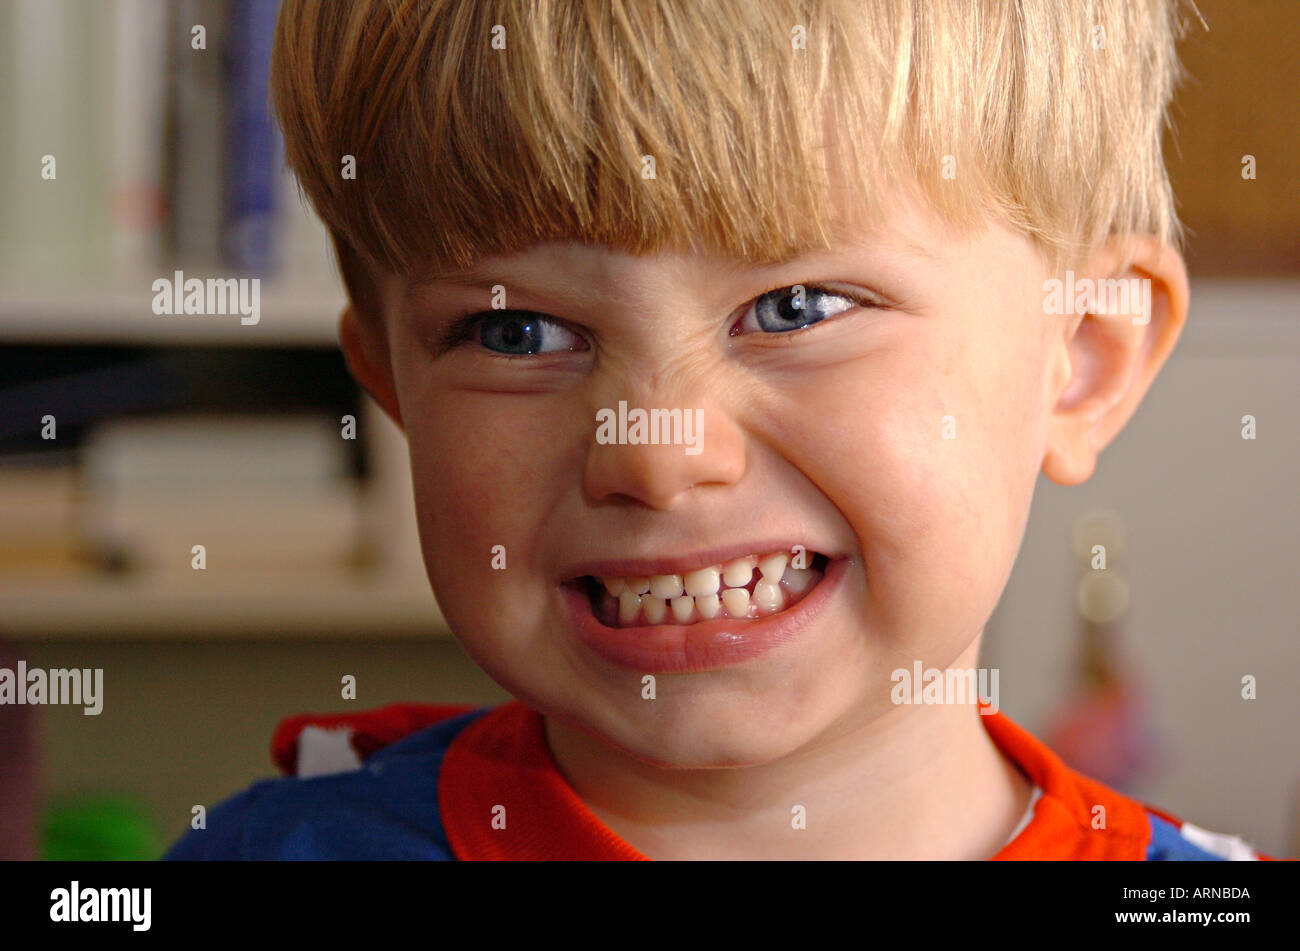 Small boy with big smile Stock Photo